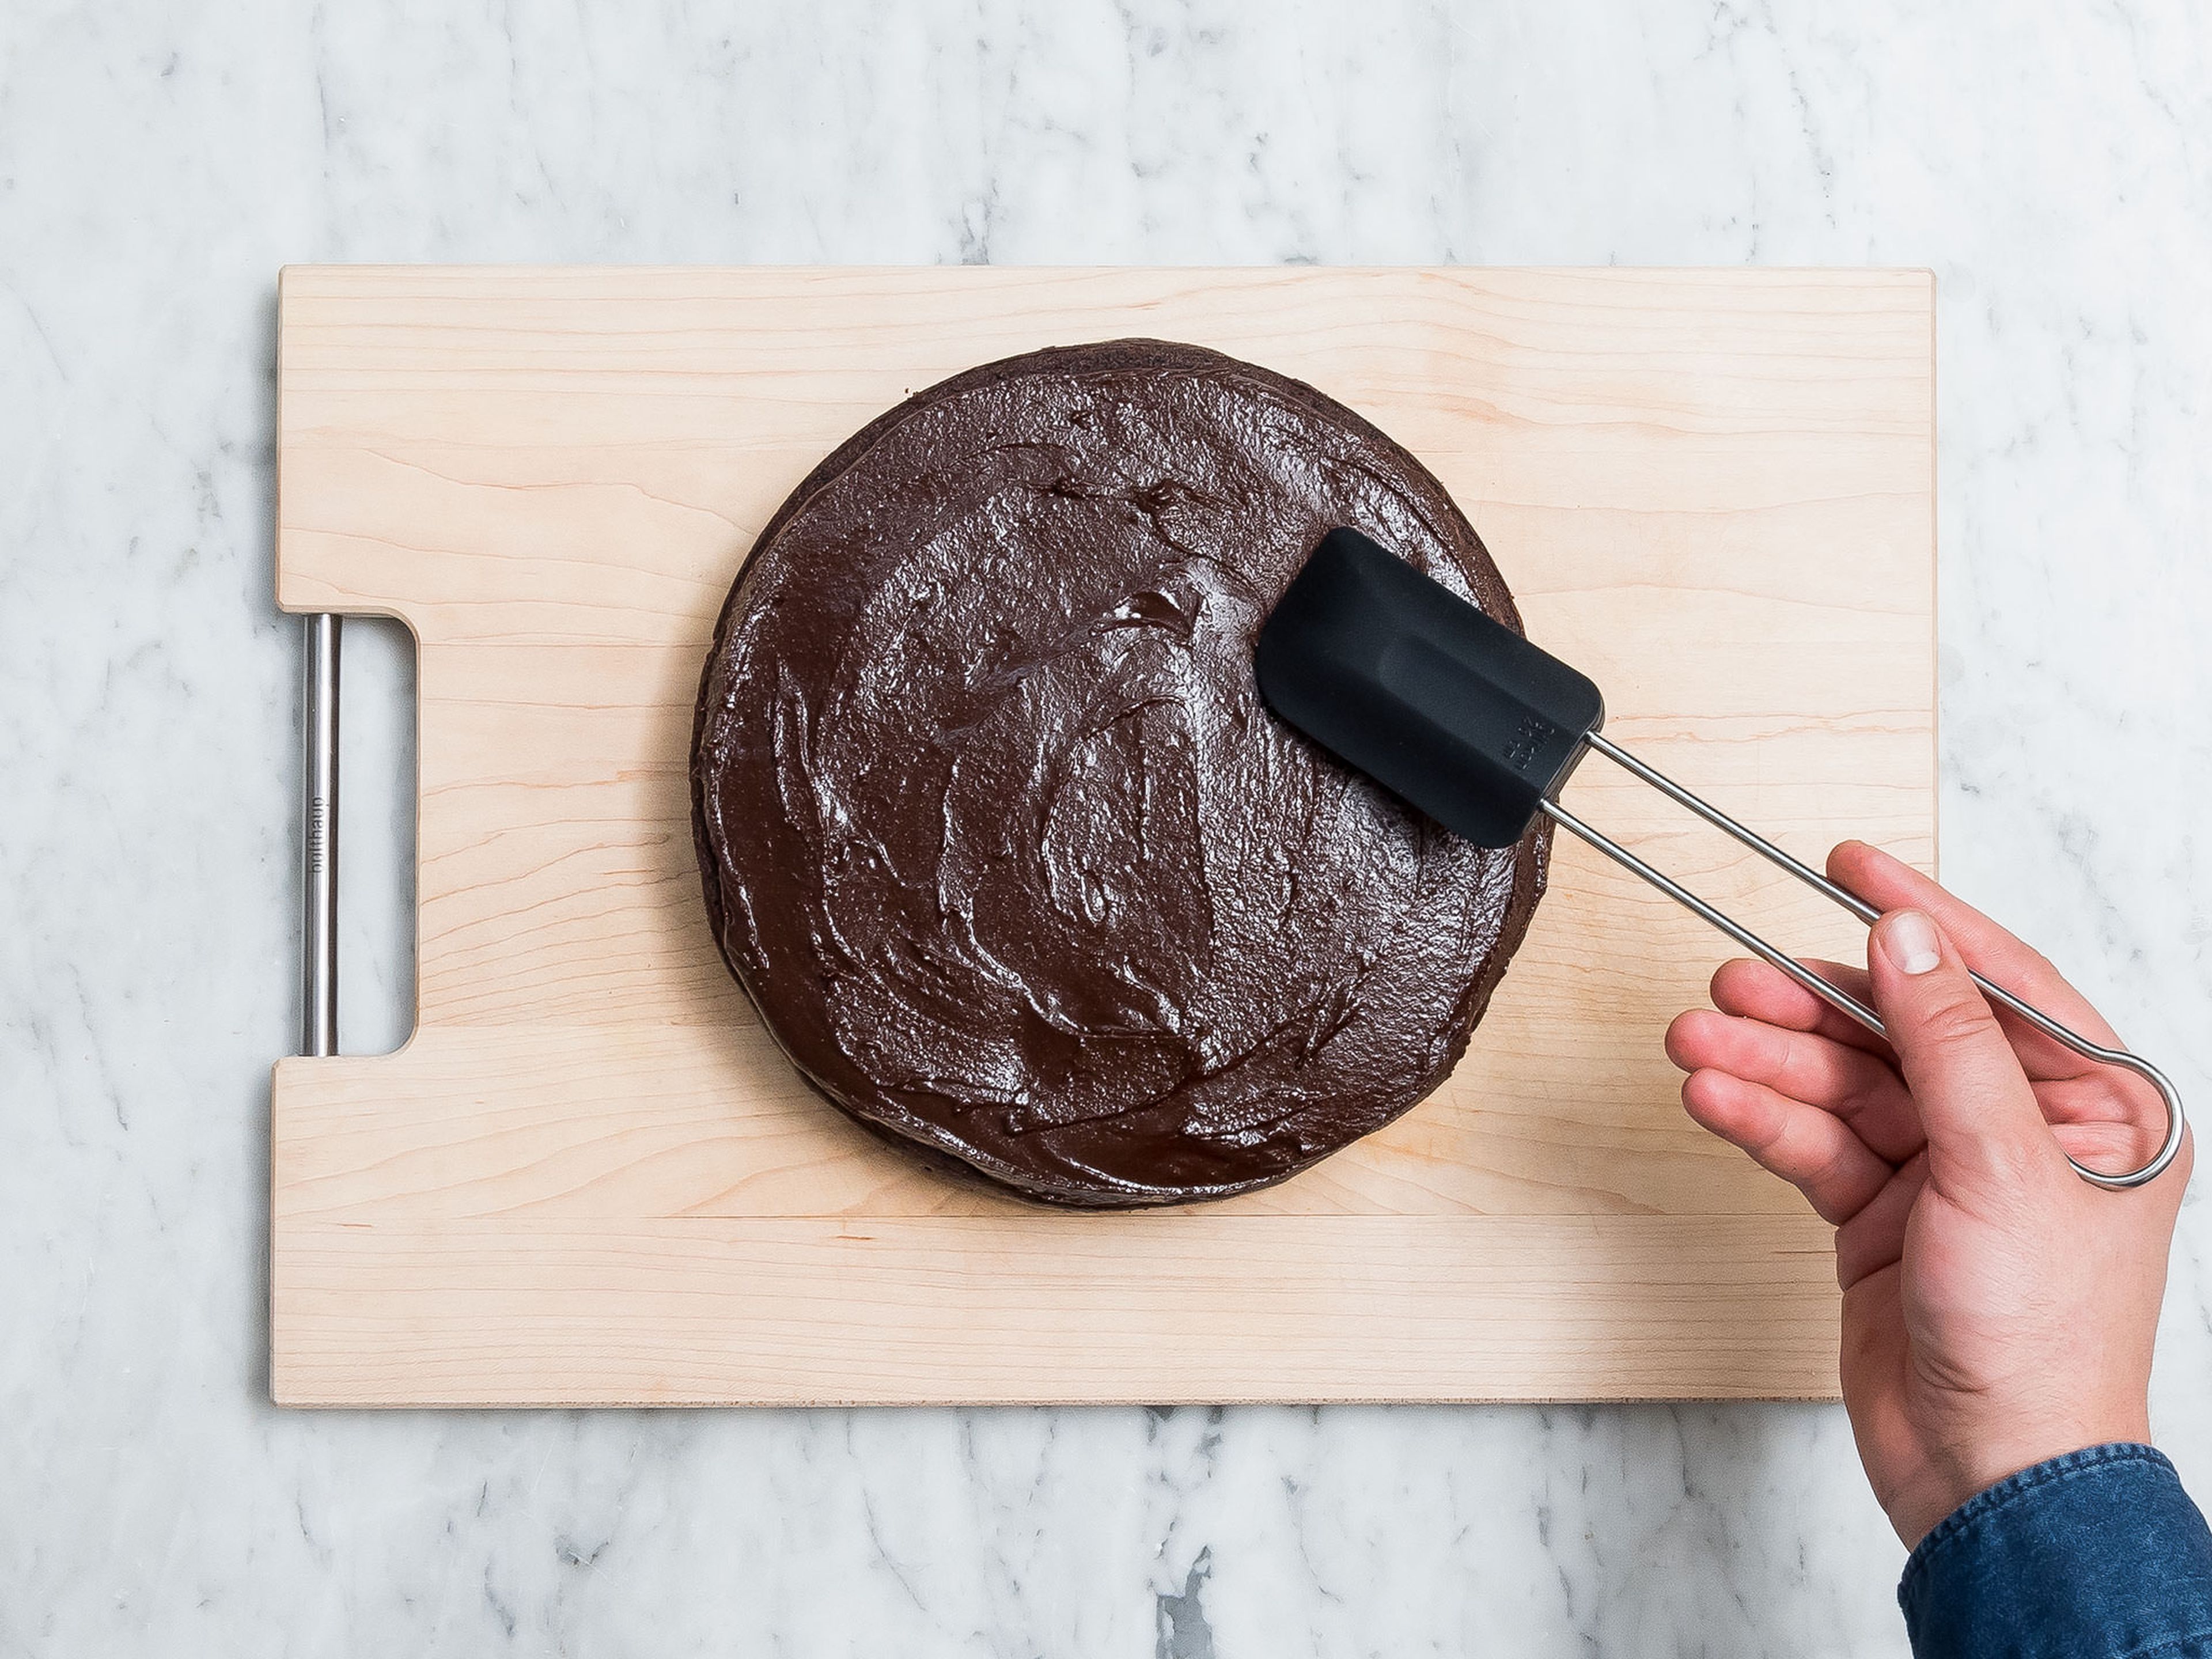 Remove the cake from the baking pan and halve to get two cake layers. Transfer one cake layer onto a large plate and spread one third of the chocolate cream on it. Add the second cake layer on top and spread the remaining chocolate cream on top and if desired also around the sides. Enjoy!